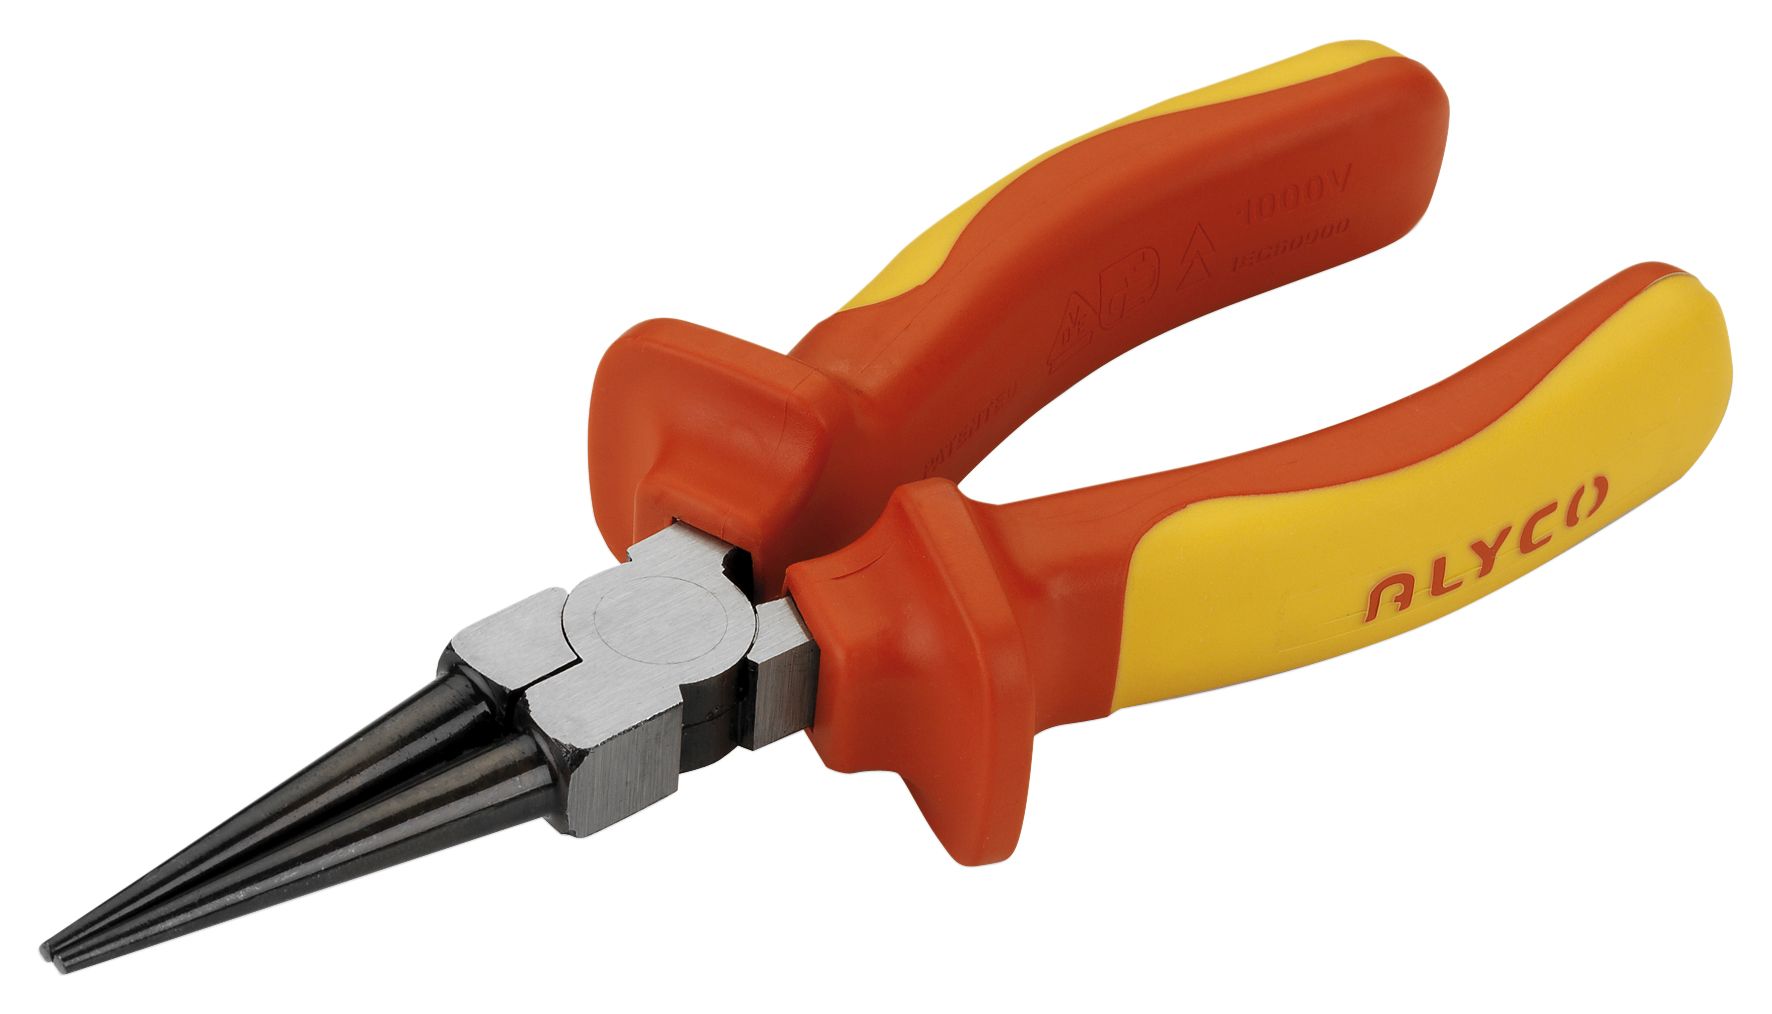 VDE Insulated Round Nose Pliers ALYCO, Products